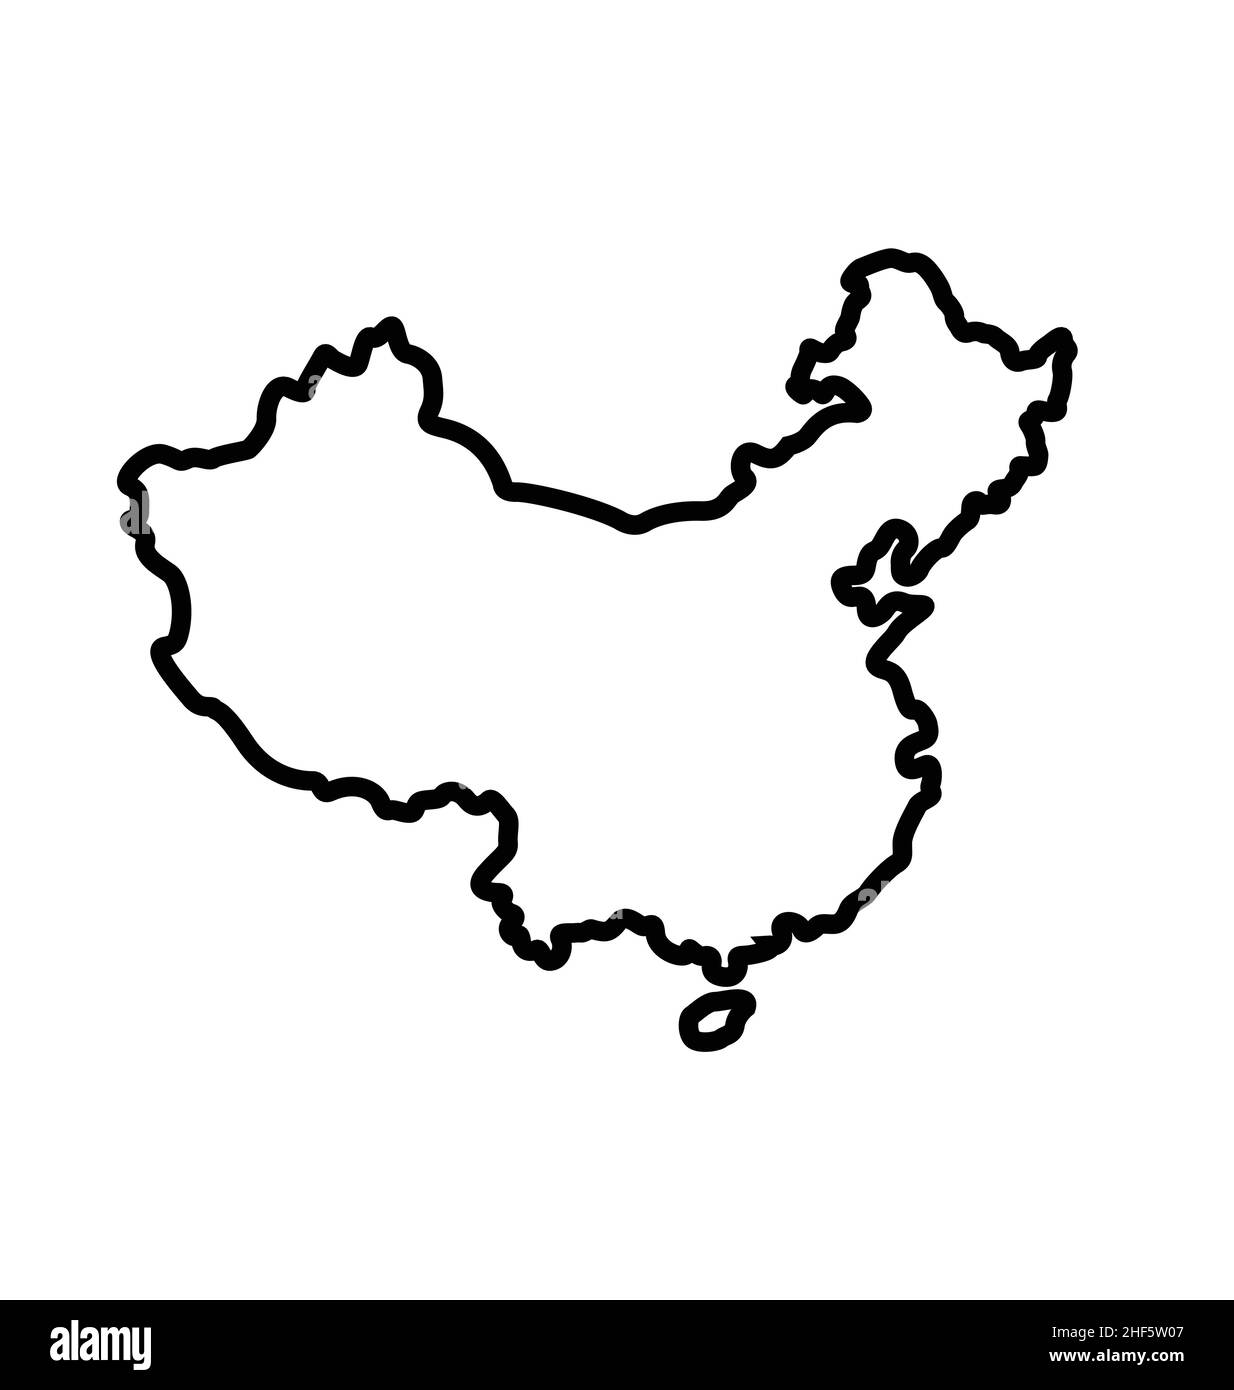 simplified map shape of PRC peoples republic of China outline silhouette vector isolated on white background Stock Vector